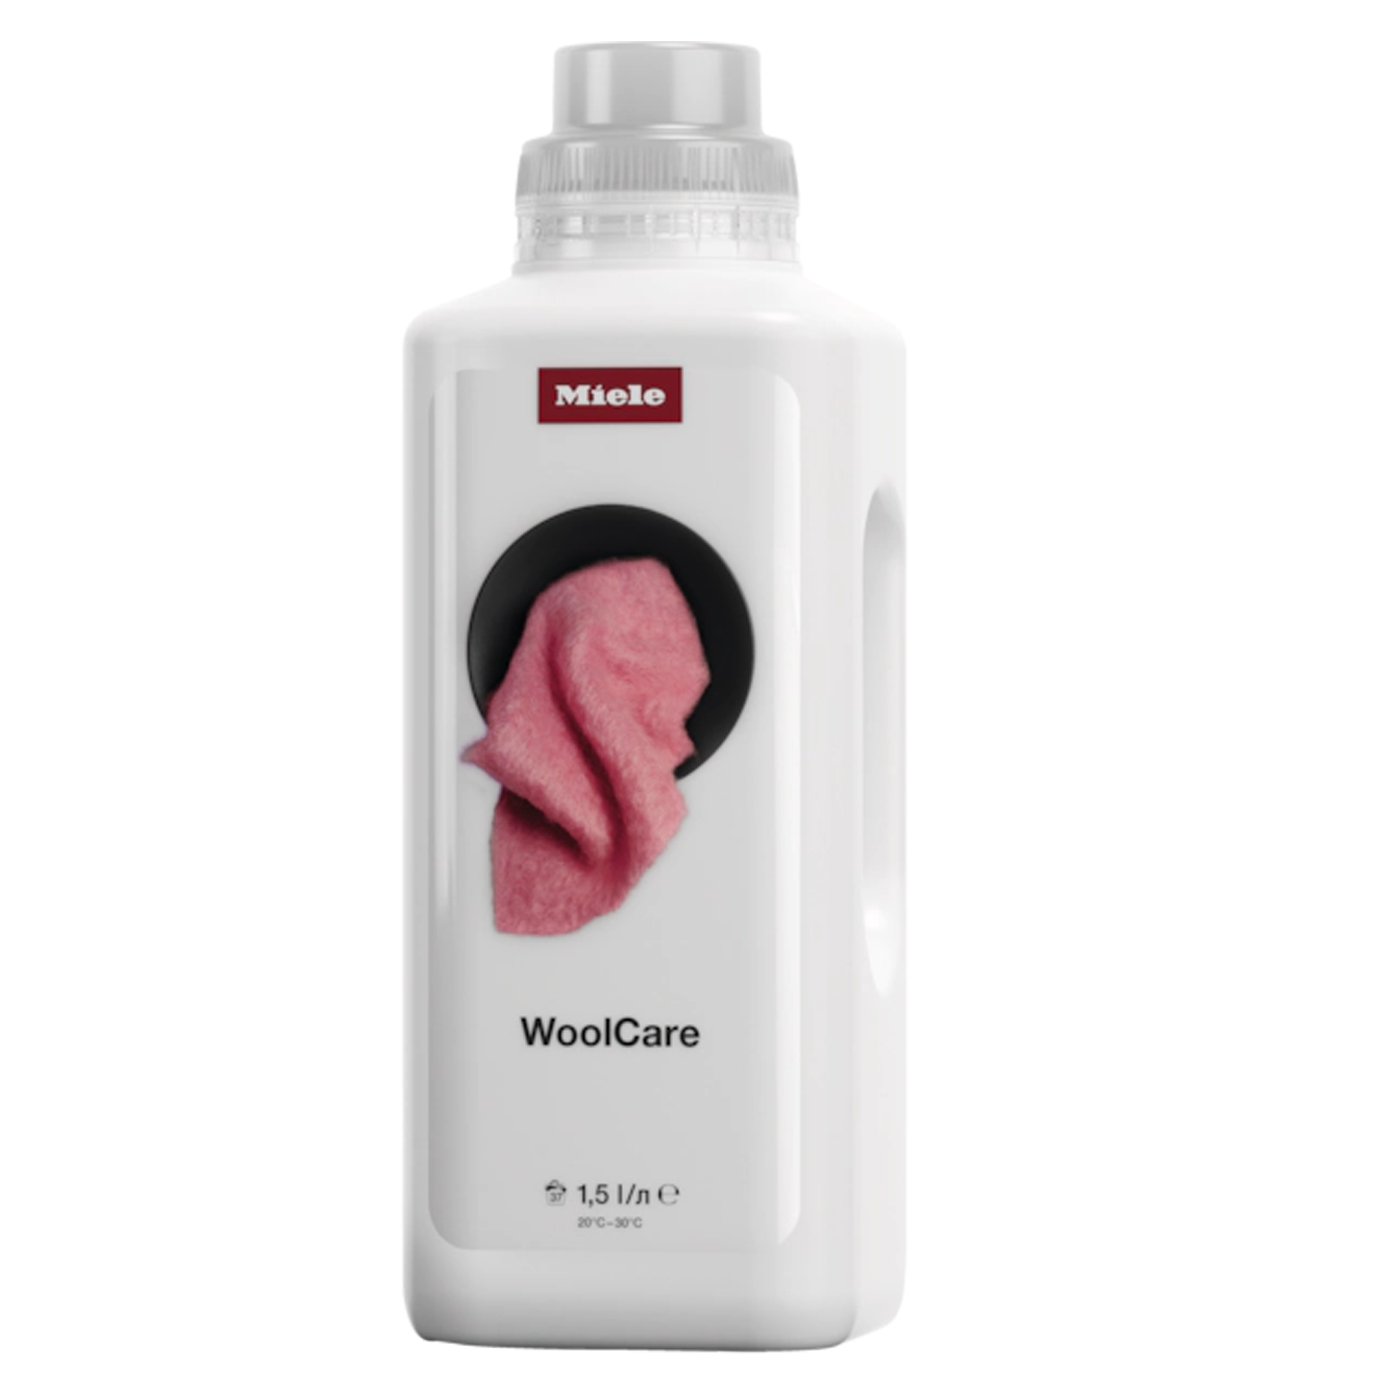 Miele WoolCare Laundry Detergent 1.5L